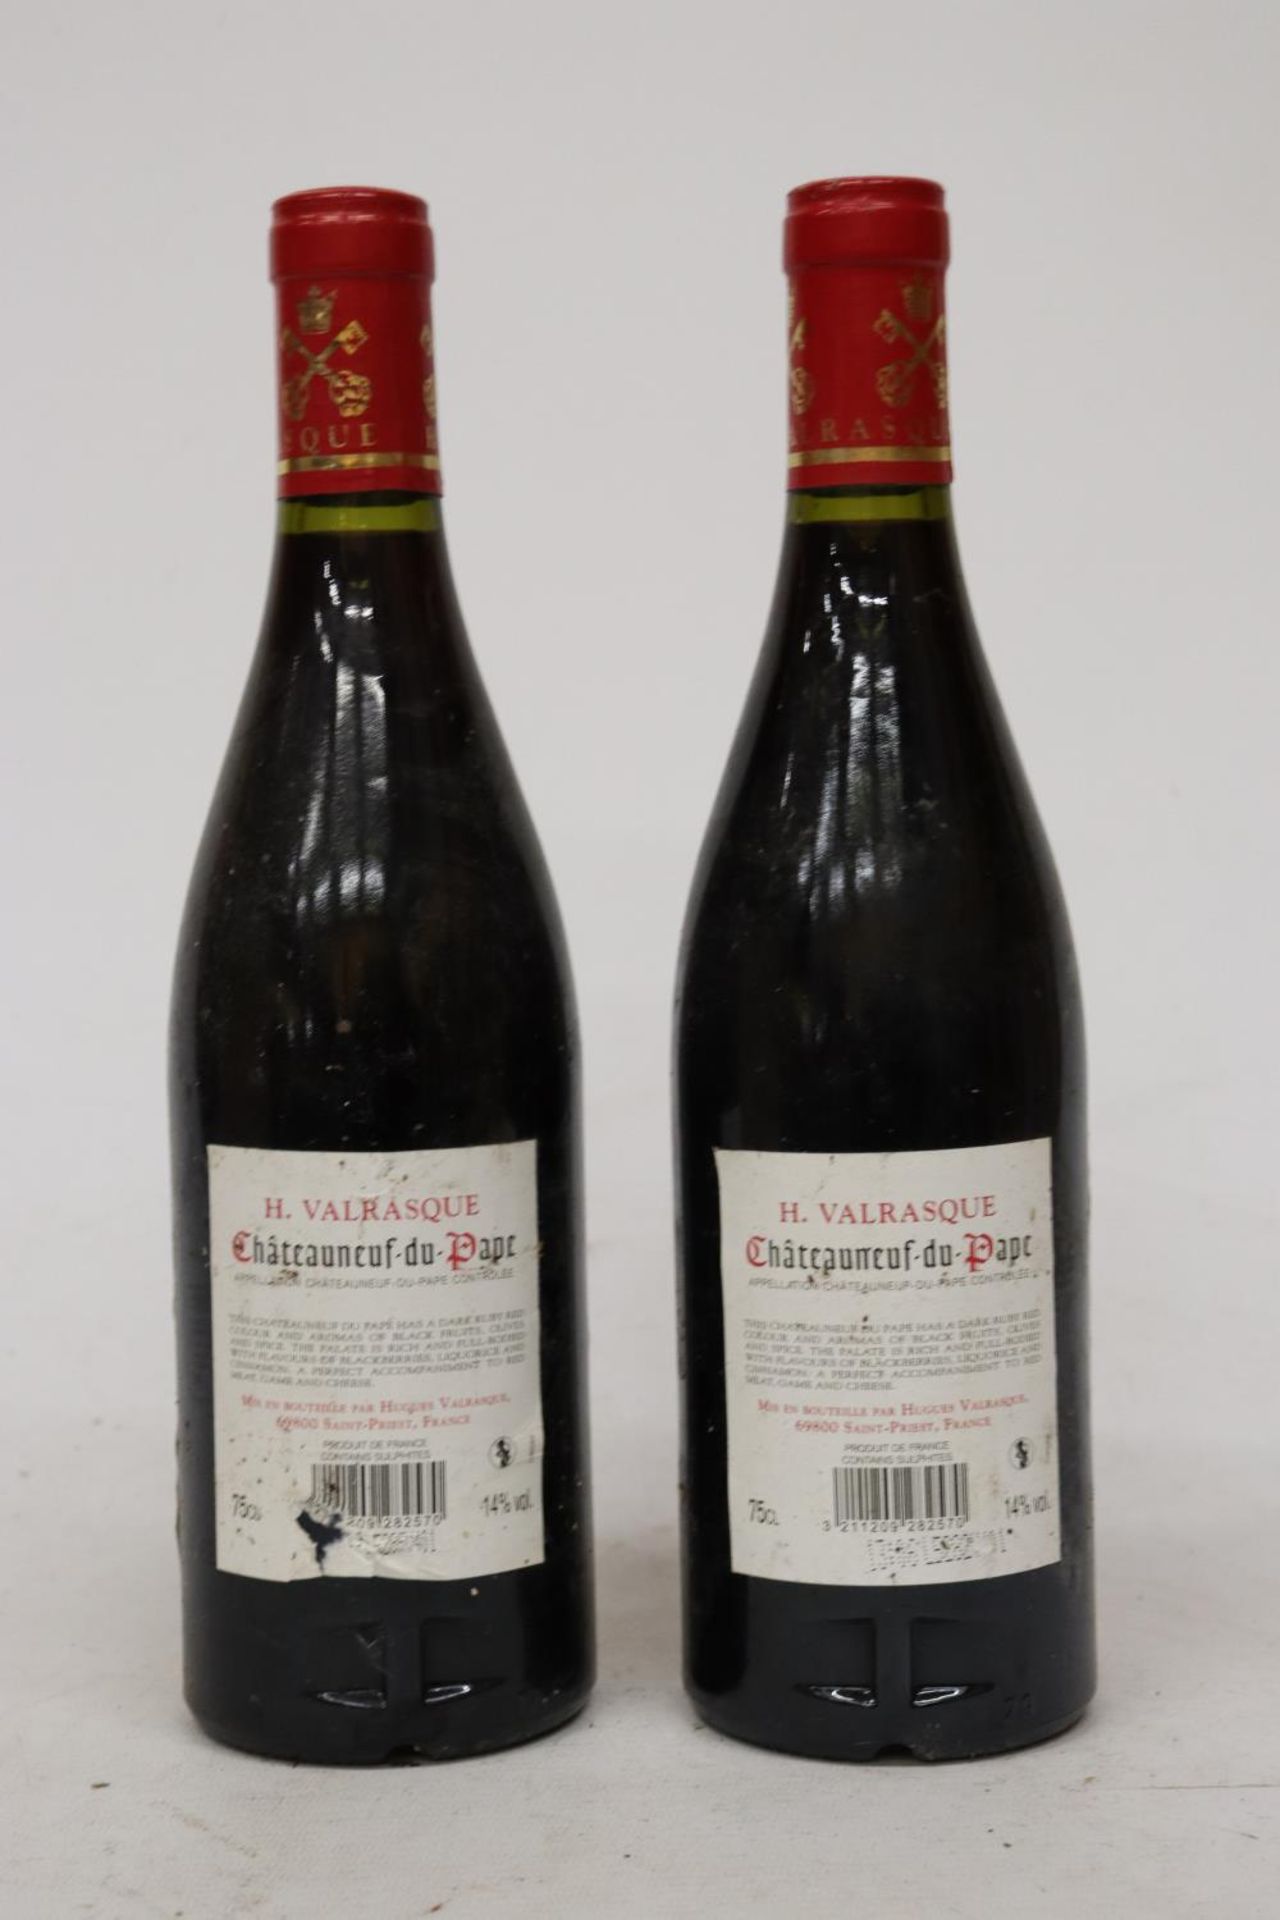 TWO BOTTLES OF H. VALRASQUE CHATEAUNEUF-DU-PAPE 2014 RED WINE - Image 3 of 4